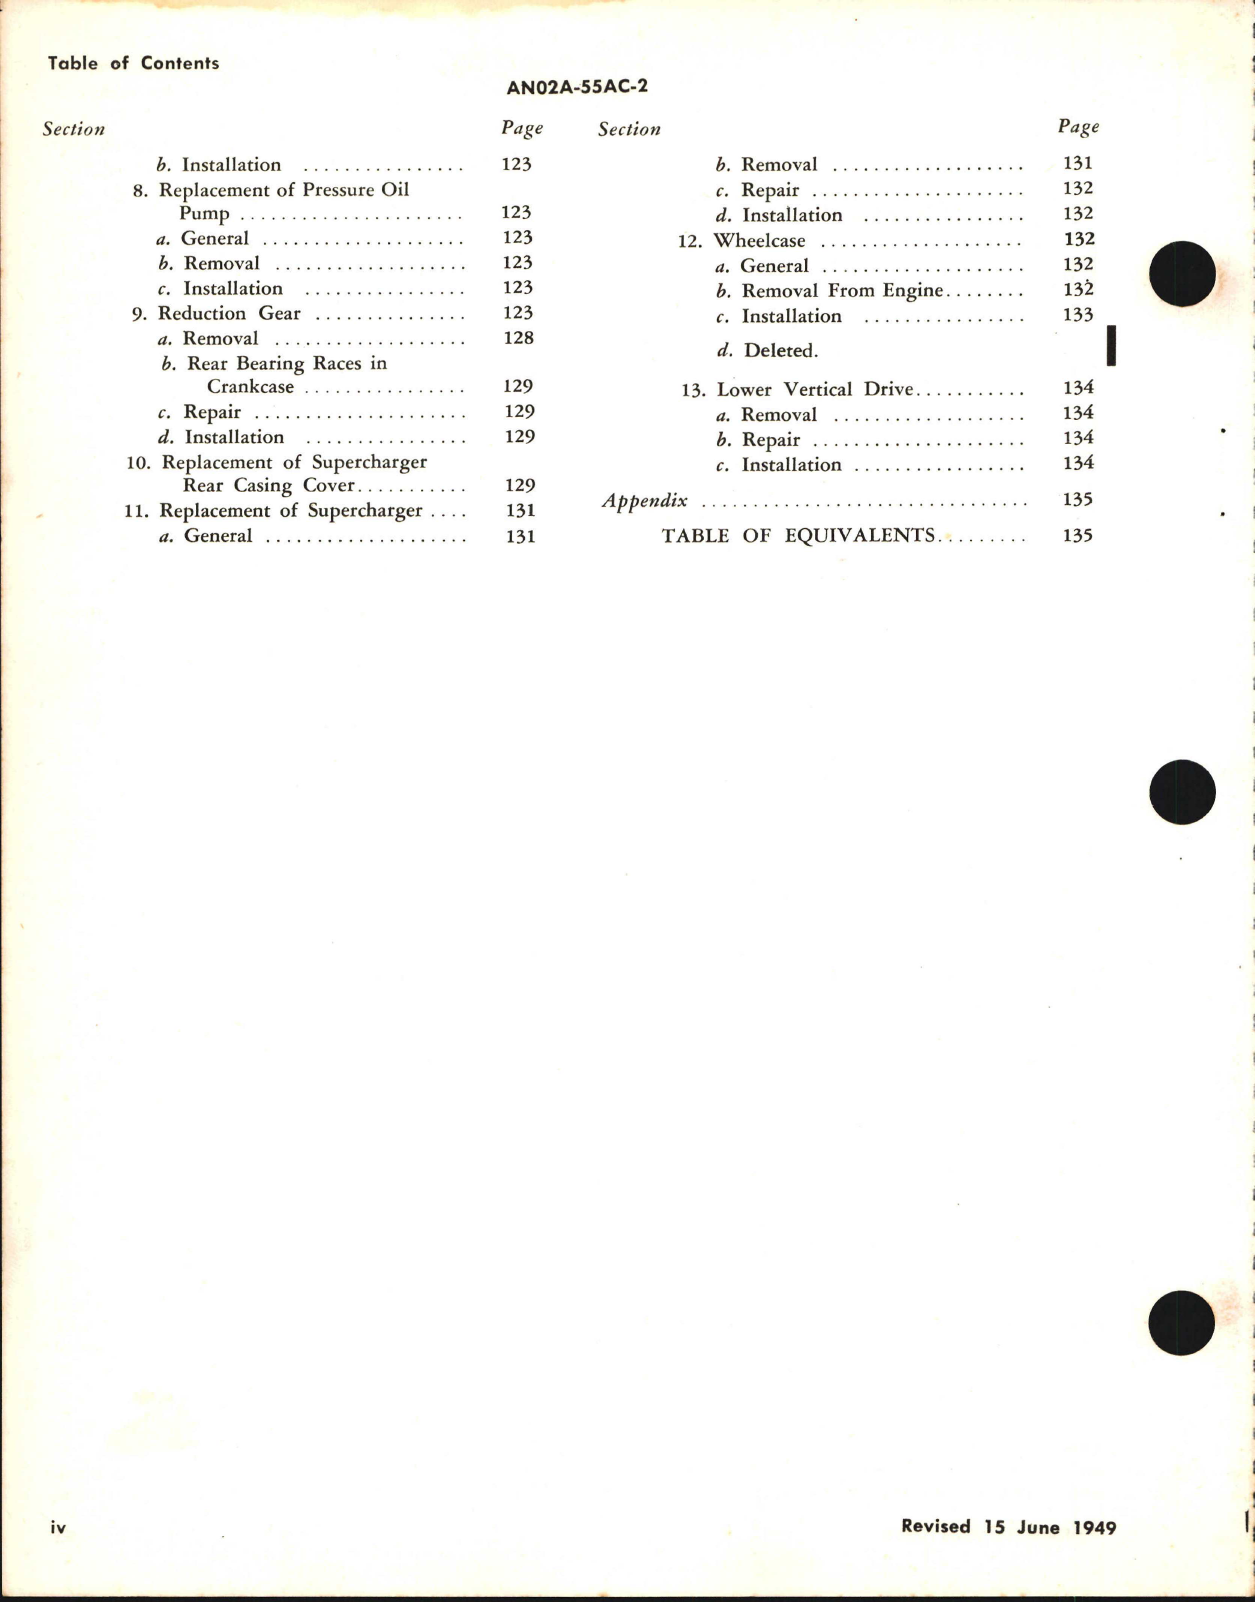 Sample page 6 from AirCorps Library document: Service Instructions for V-1650-3, -7, and Merlin 68 and 69 Engines